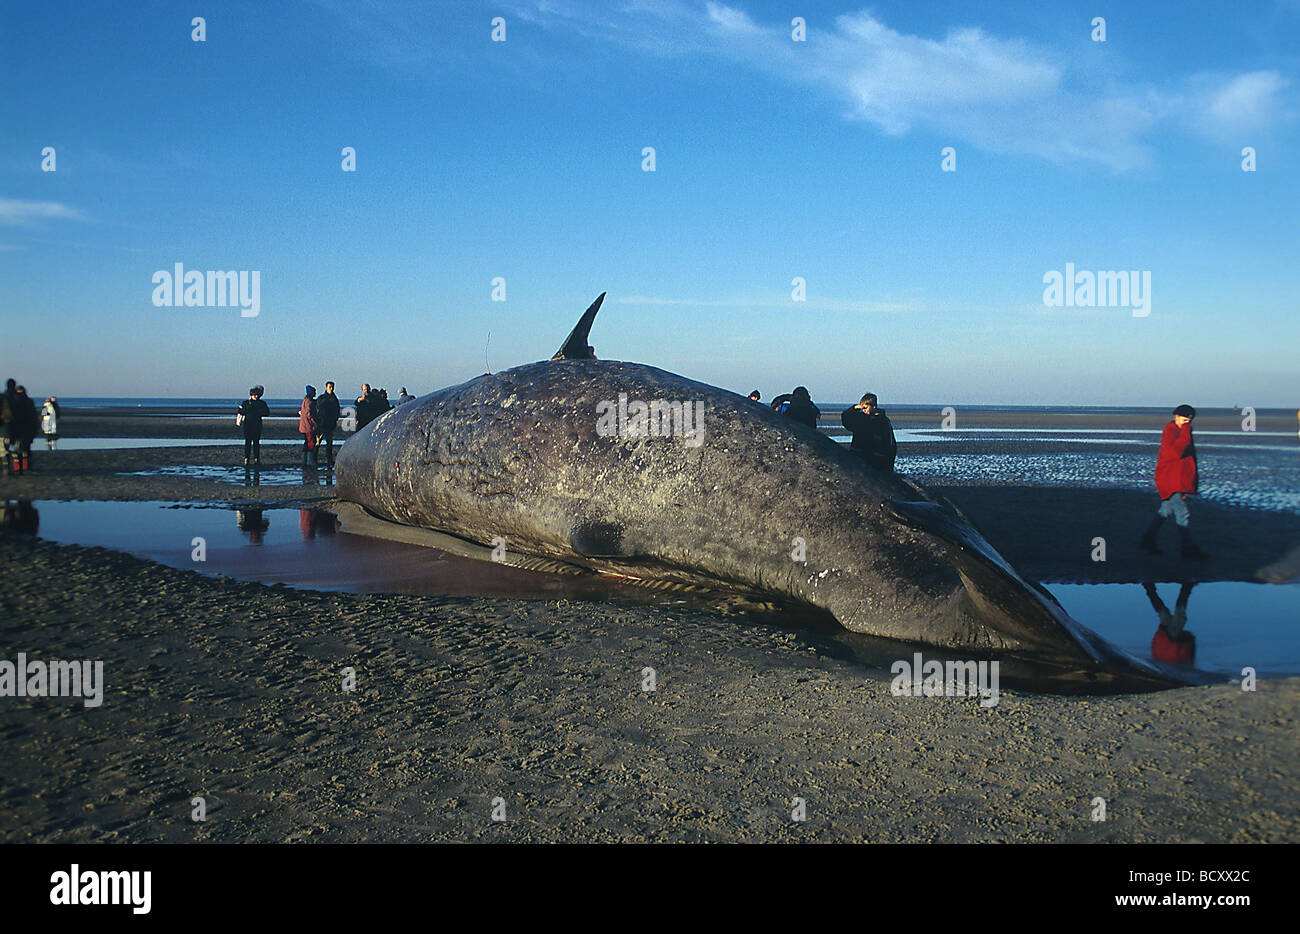 Sperm Whale (Physeter catodon), stranded. Germany Stock Photo - Alamy